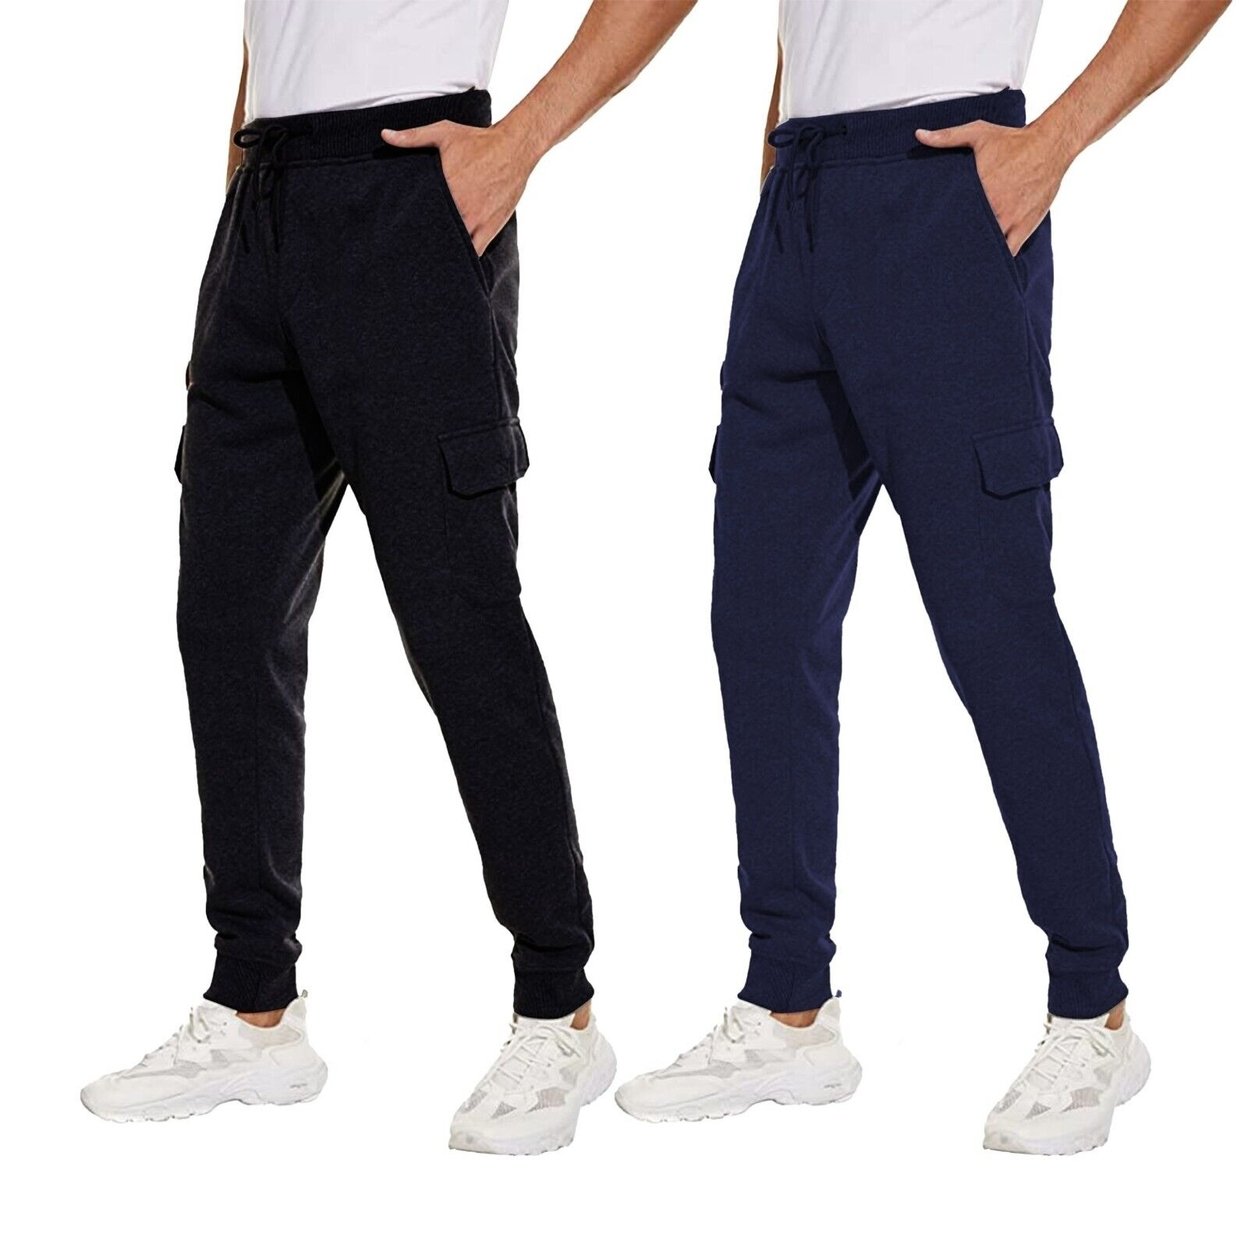 2-Pack Men's Ultra Soft Winter Warm Thick Athletic Sherpa Lined Jogger Pants - Black&navy, Xx-large